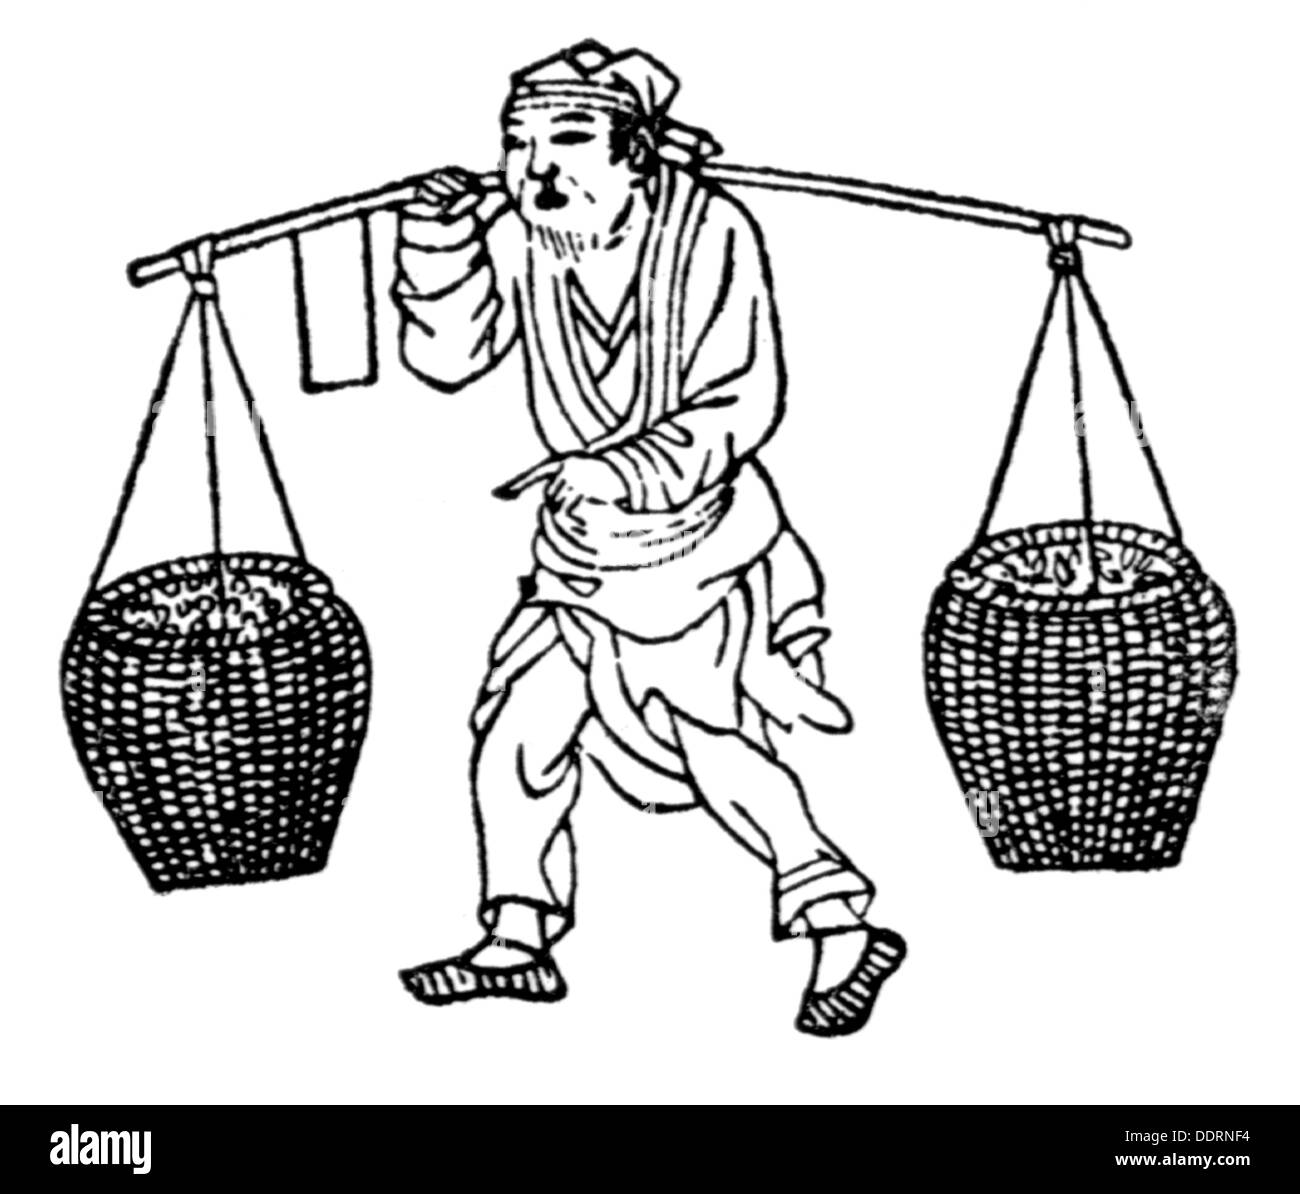 agriculture, rice growing, rice farmer transports rice in baskets, wood engraving after Japanese illustration, 19th century, Japan, carrying, carry, basket, baskets, pole, poles, shoulder, shoulders, Japanese, rice farmer, farmer, farmers, people, men, man, working, agricultural work, farm labour, farm labor, Asia, food, foodstuff, agriculture, farming, transport, transporting, historic, historical, Additional-Rights-Clearences-Not Available Stock Photo